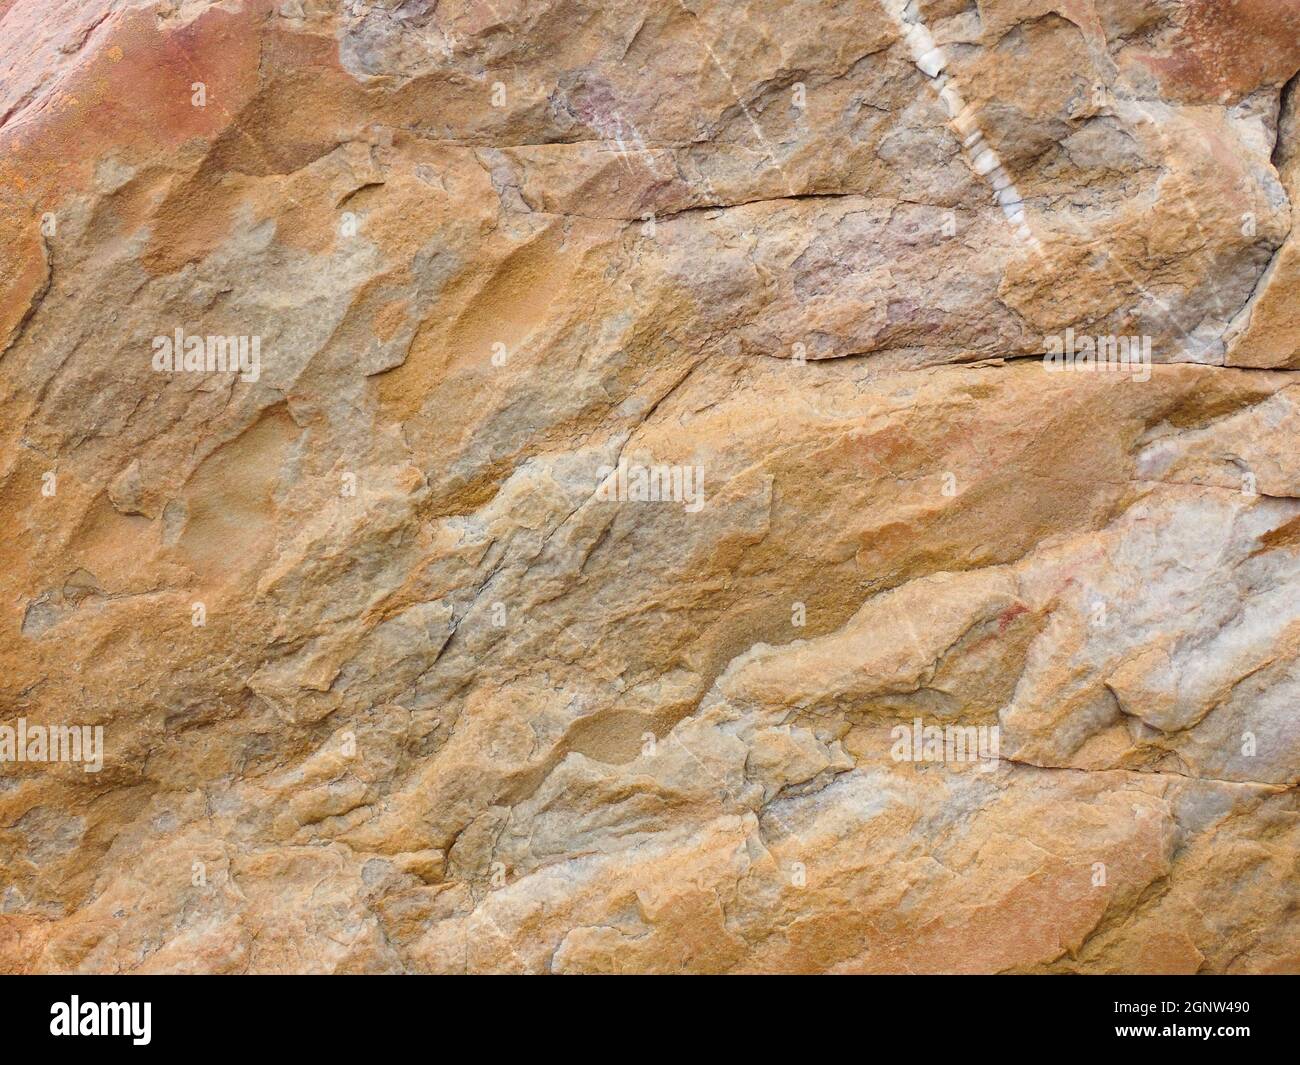 Natural Sandstone Rock Surface With Streaks Of Quartz Stock Photo